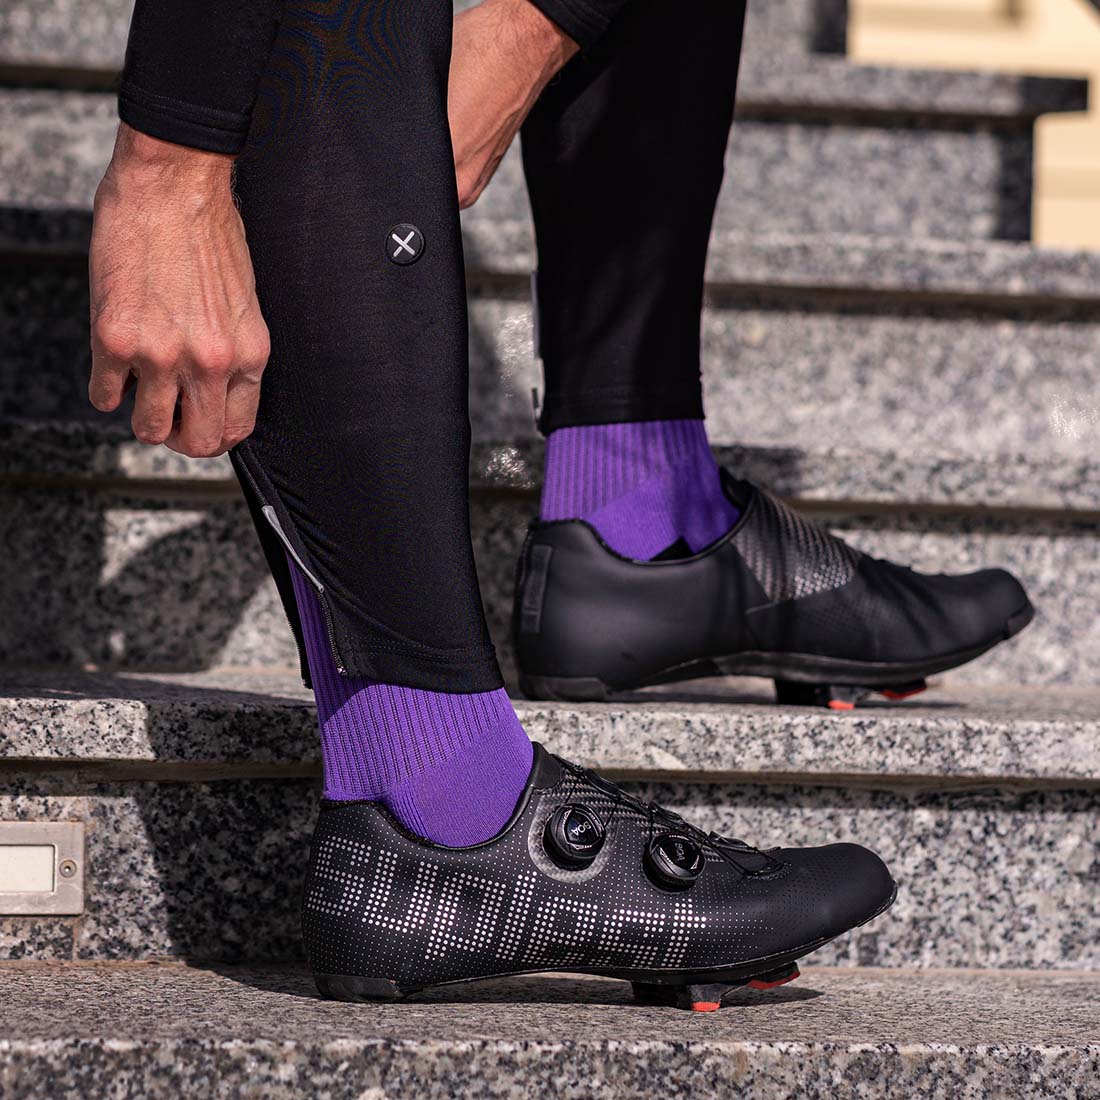 thick insulated autumn socks without merino and no wool addition, totally animal free and vegan